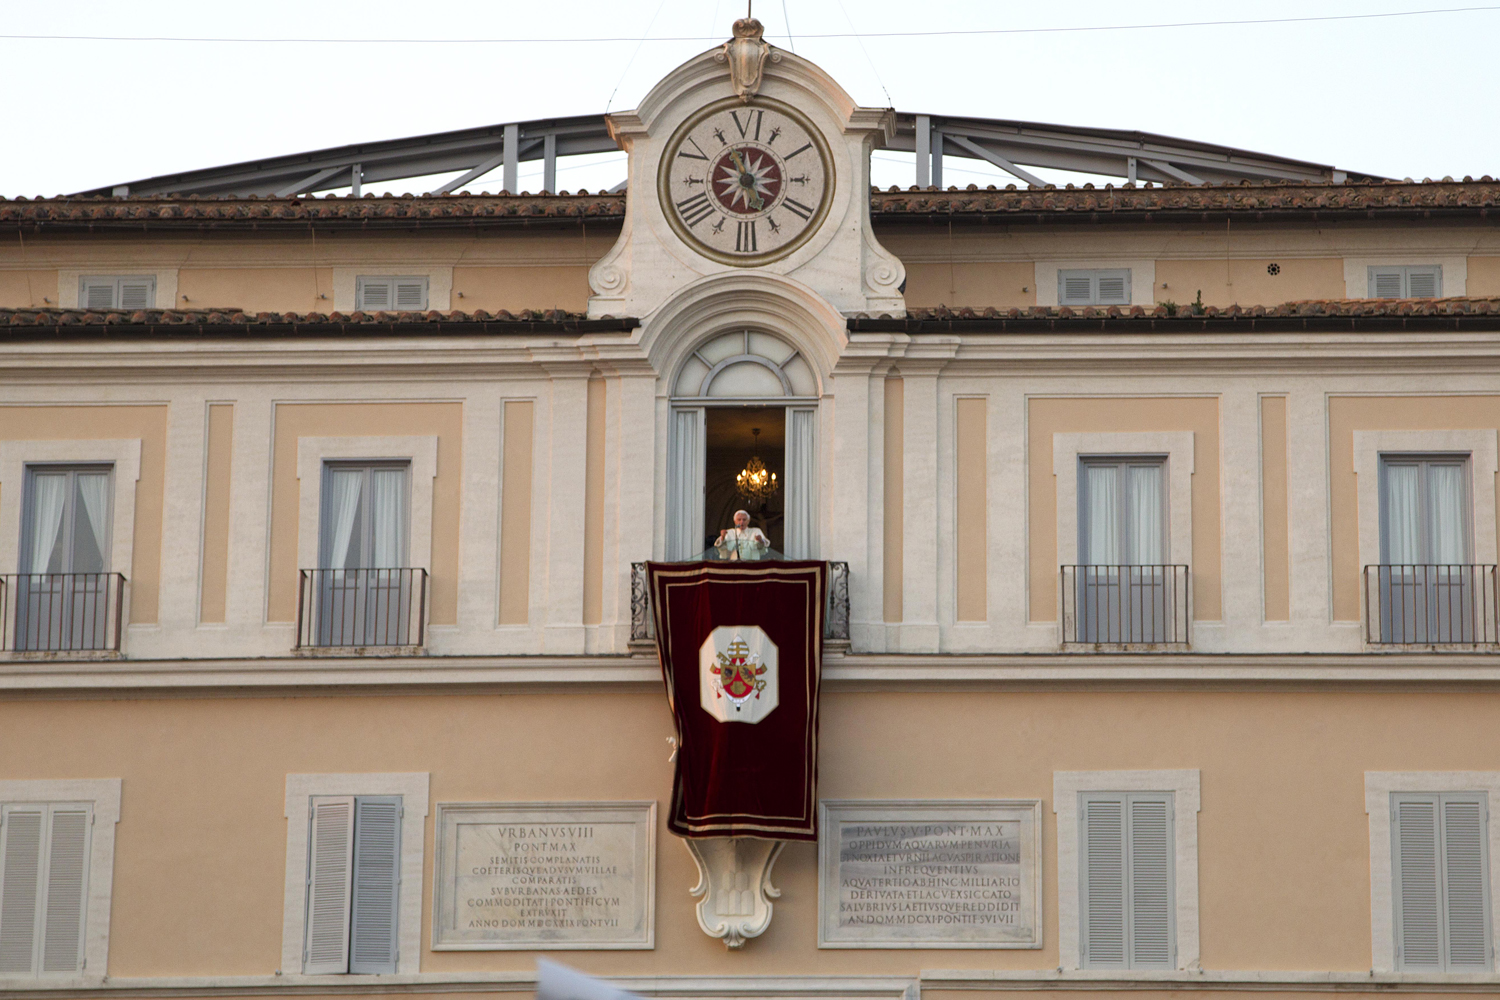 Feb. 28, 2013. Pope Benedict XVI speaks from the balcony window of the Pontifical summer residence in Castel Gandolfo, some 35 kilometers south of Rome, to a cheering crowd gathered to see him off the day he ends his pontificate,